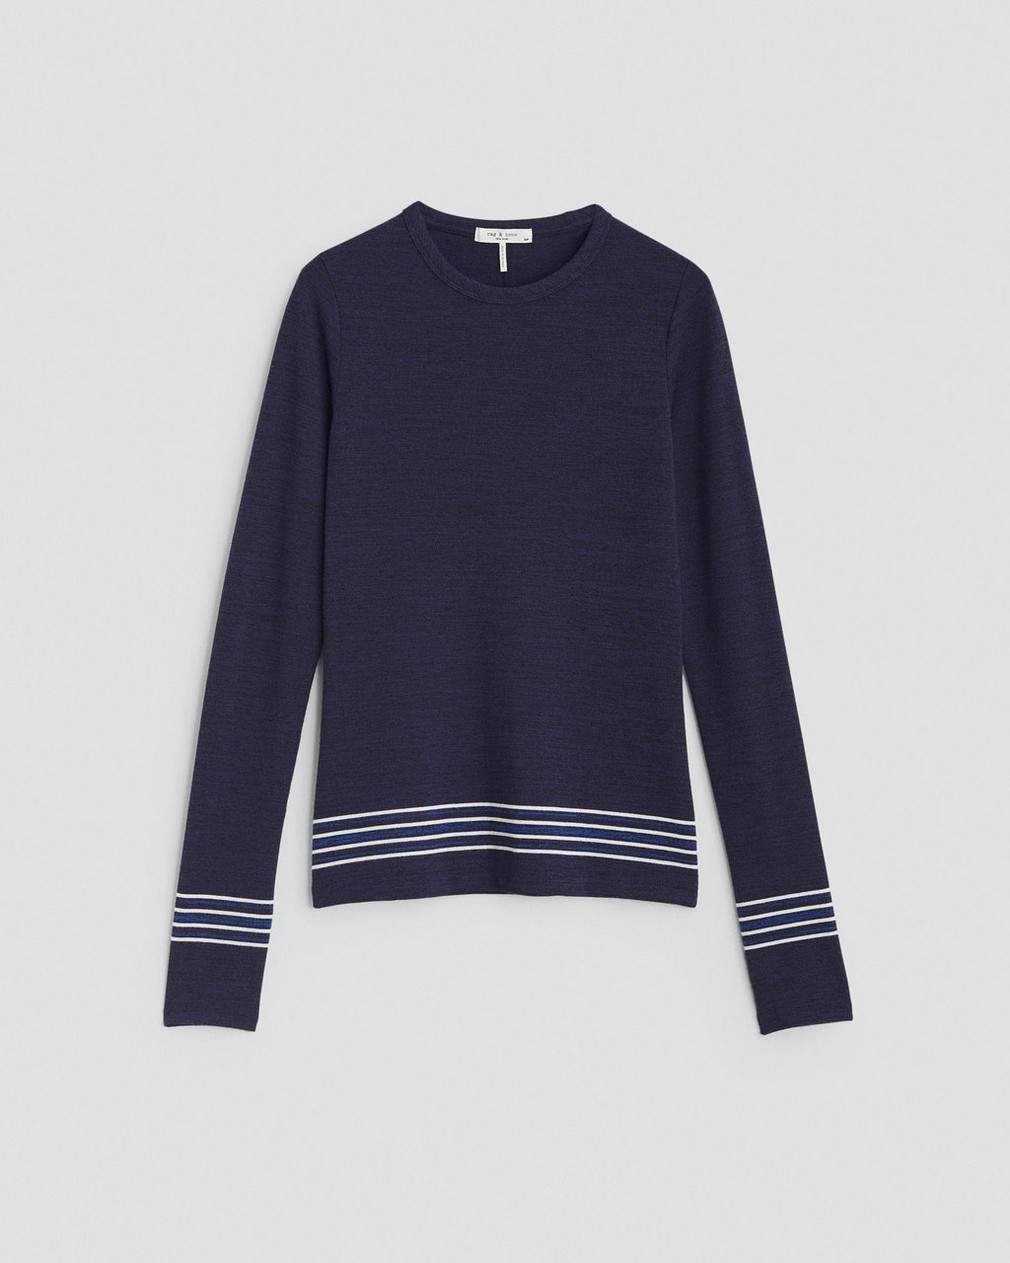 The Knit Long Sleeve